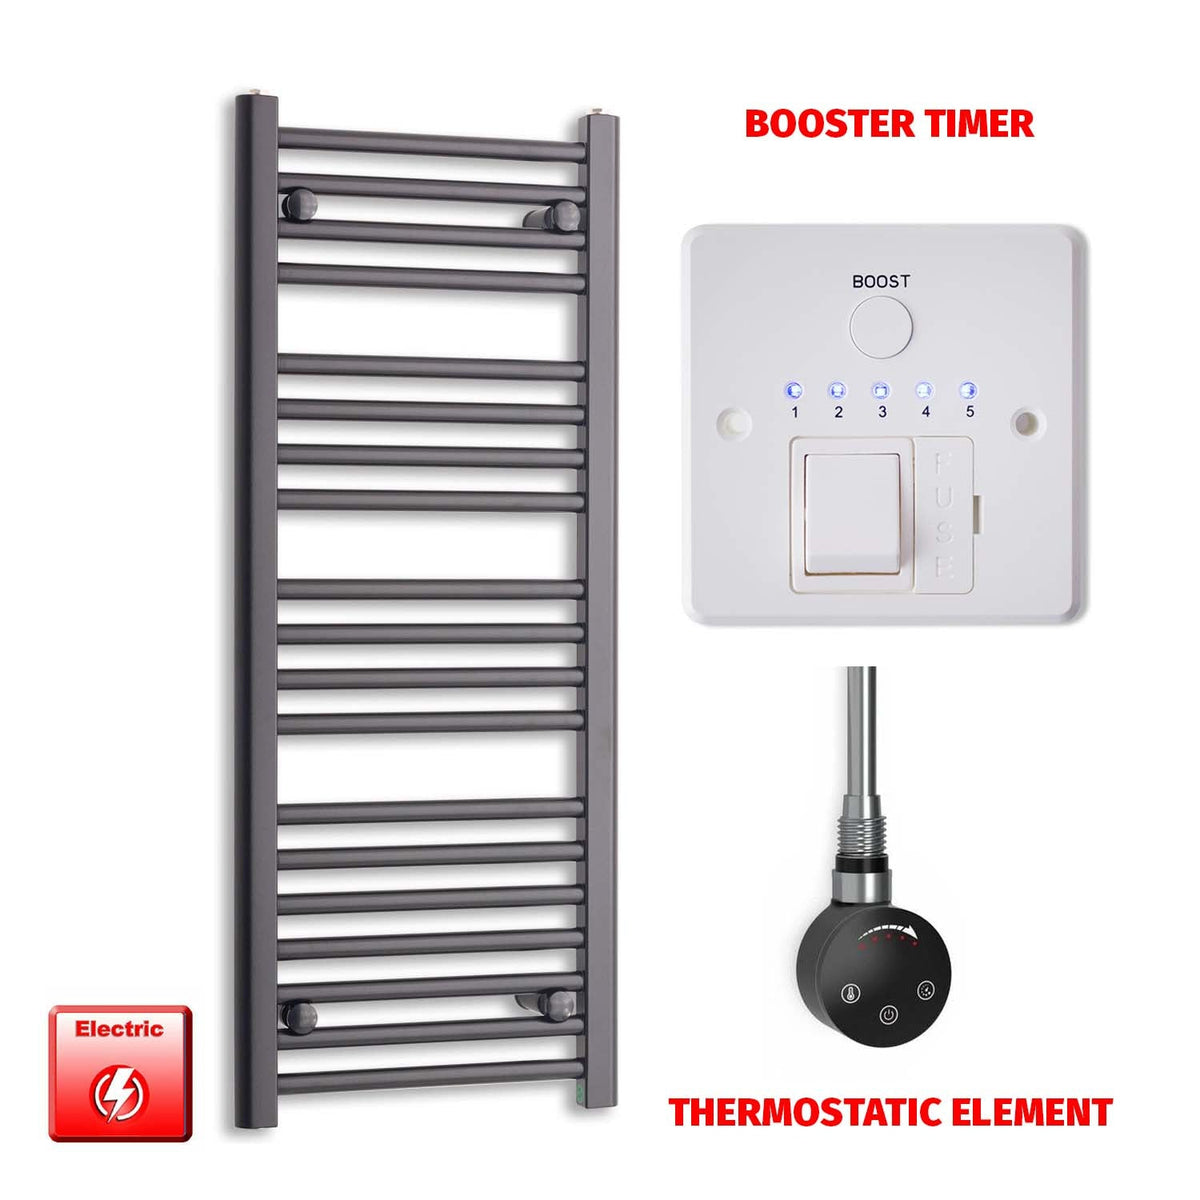 1000 x 400 Flat Black Pre-Filled Electric Heated Towel Radiator HTR Smart Thermostatic Booster Timer